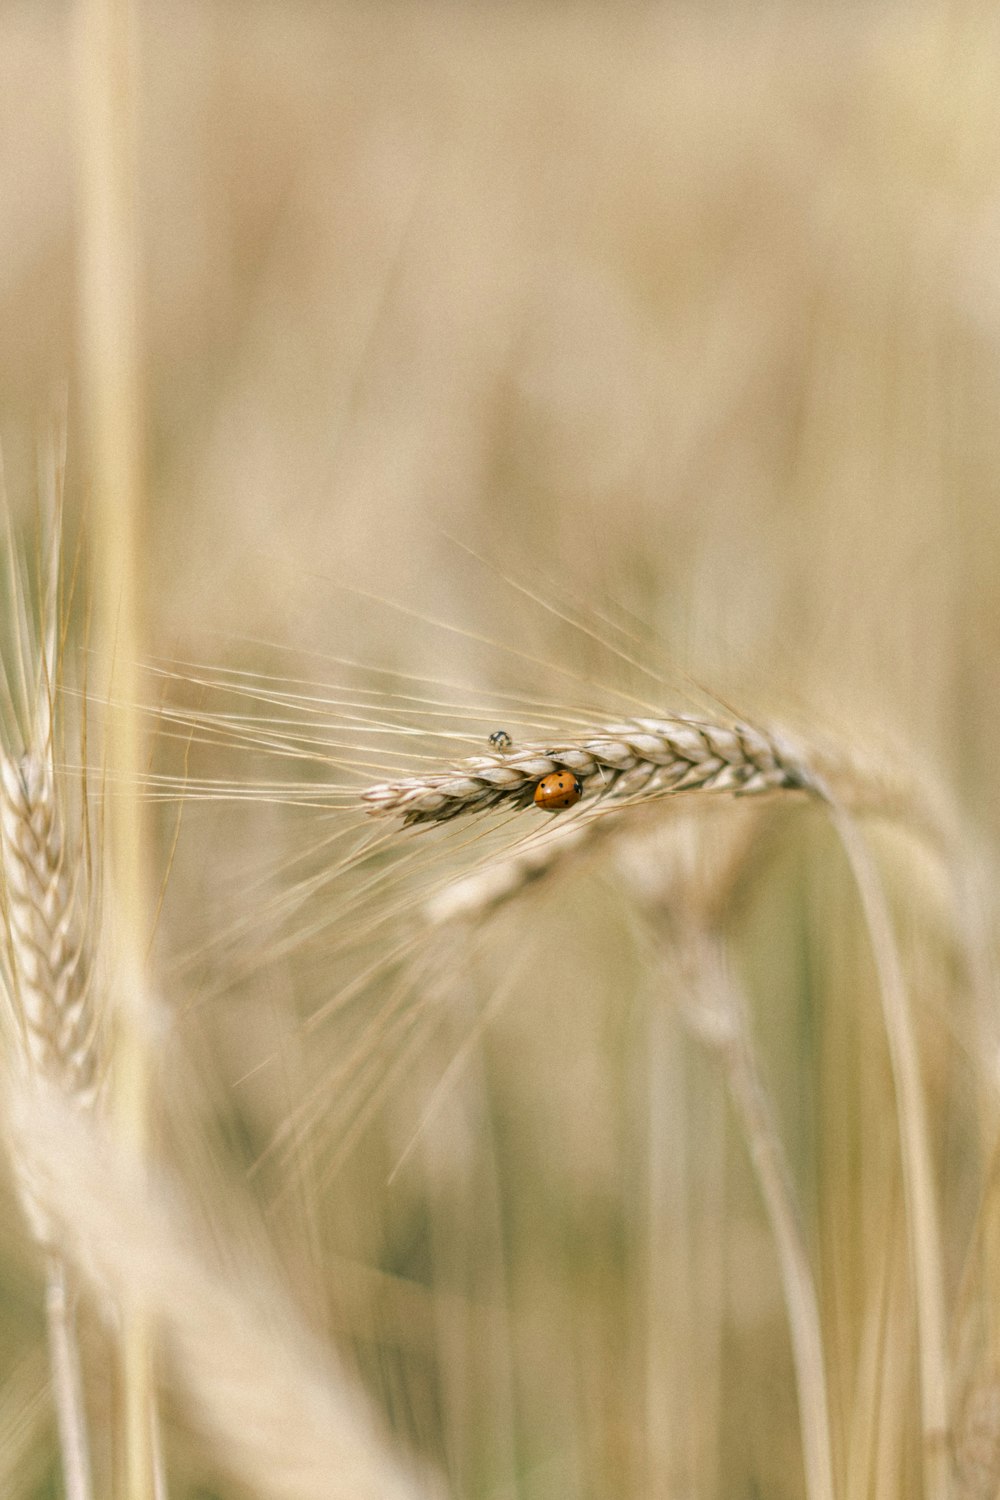 a close up of a stalk of wheat in a field